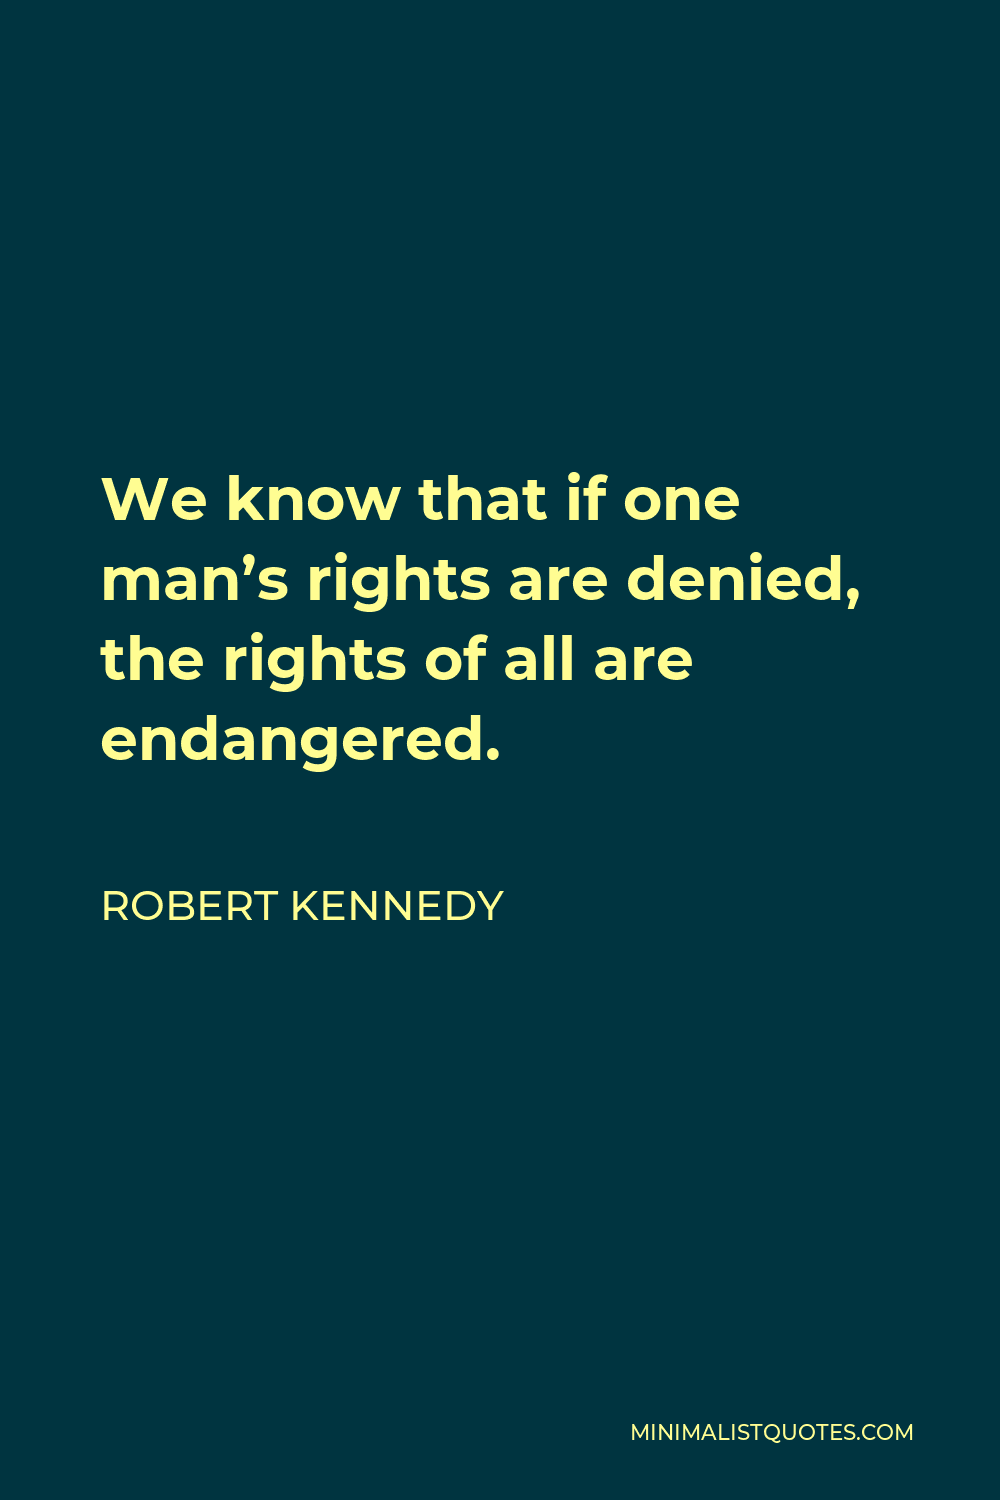 Robert Kennedy Quote - We know that if one man’s rights are denied, the rights of all are endangered.